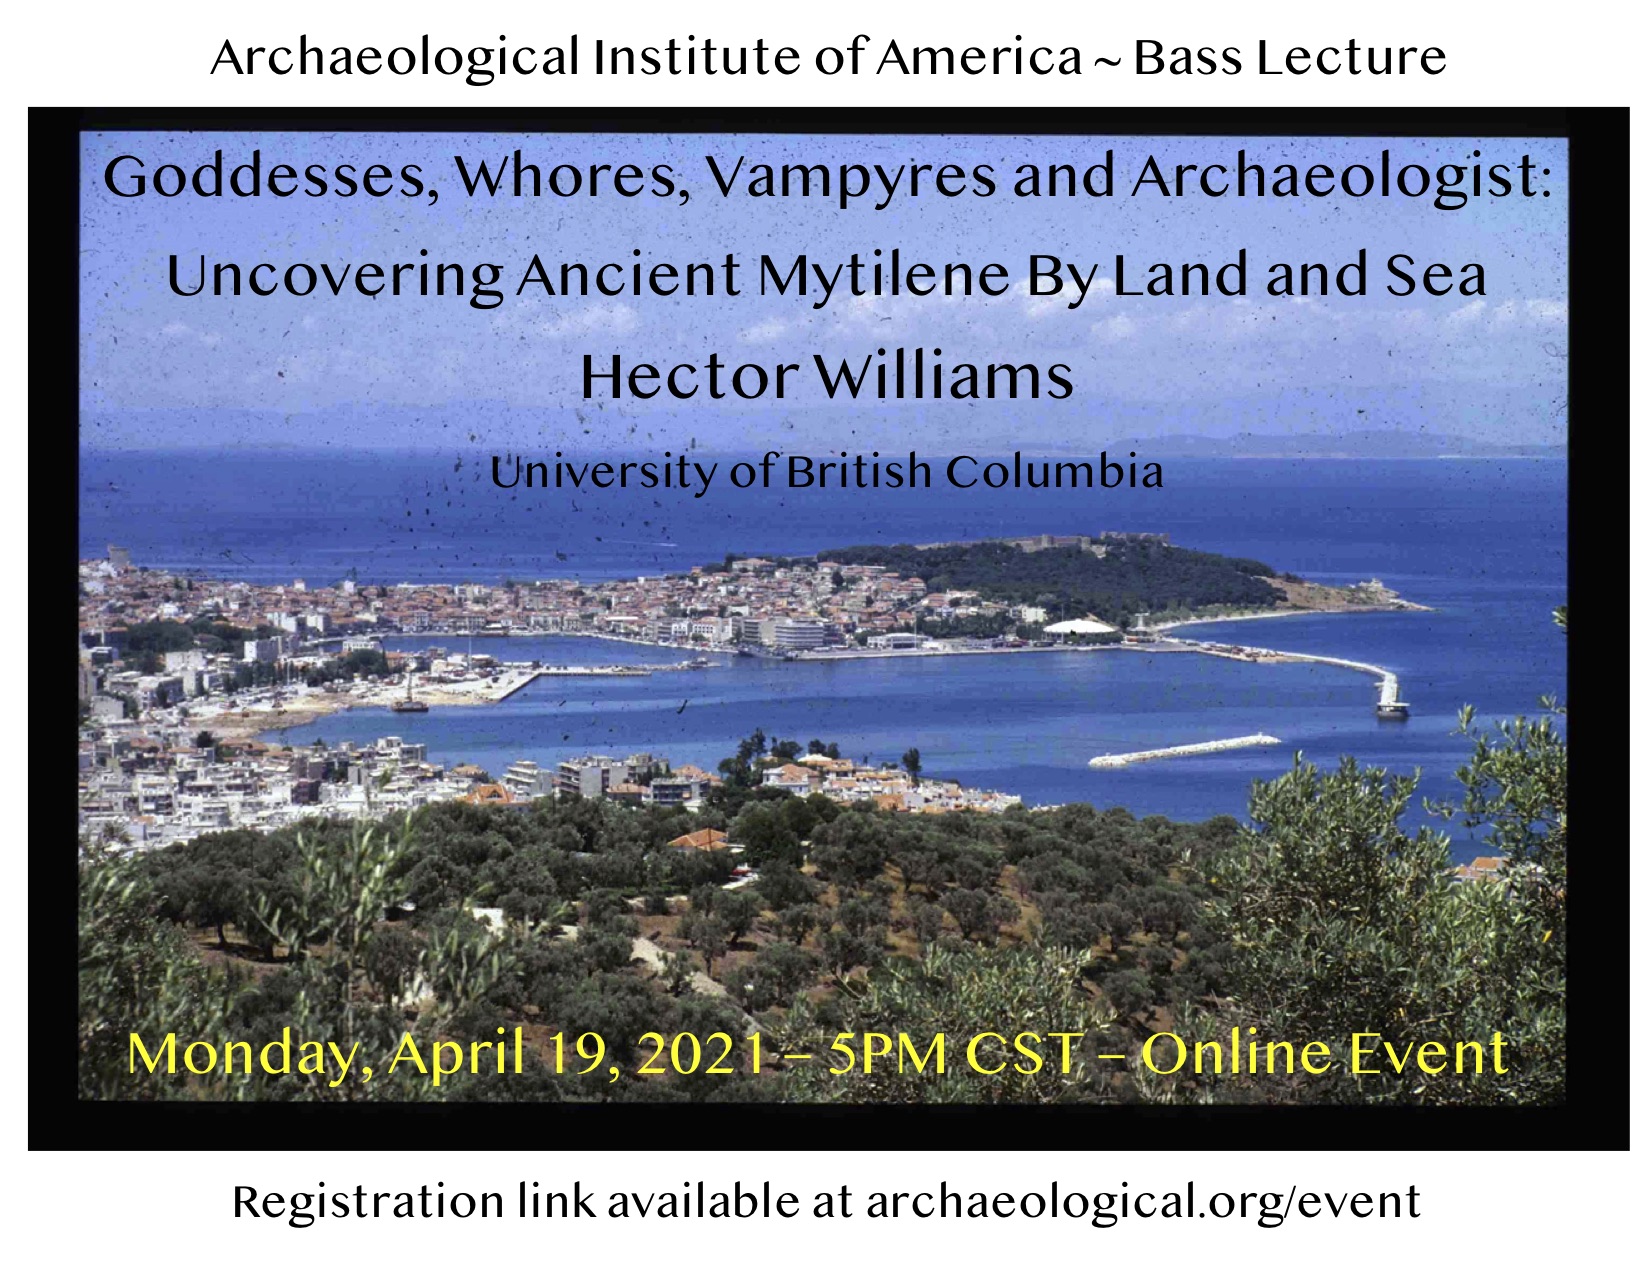 Goddesses, Whores, Vampyres and Archaeologists: Uncovering Ancient Mytilene By Land and Sea